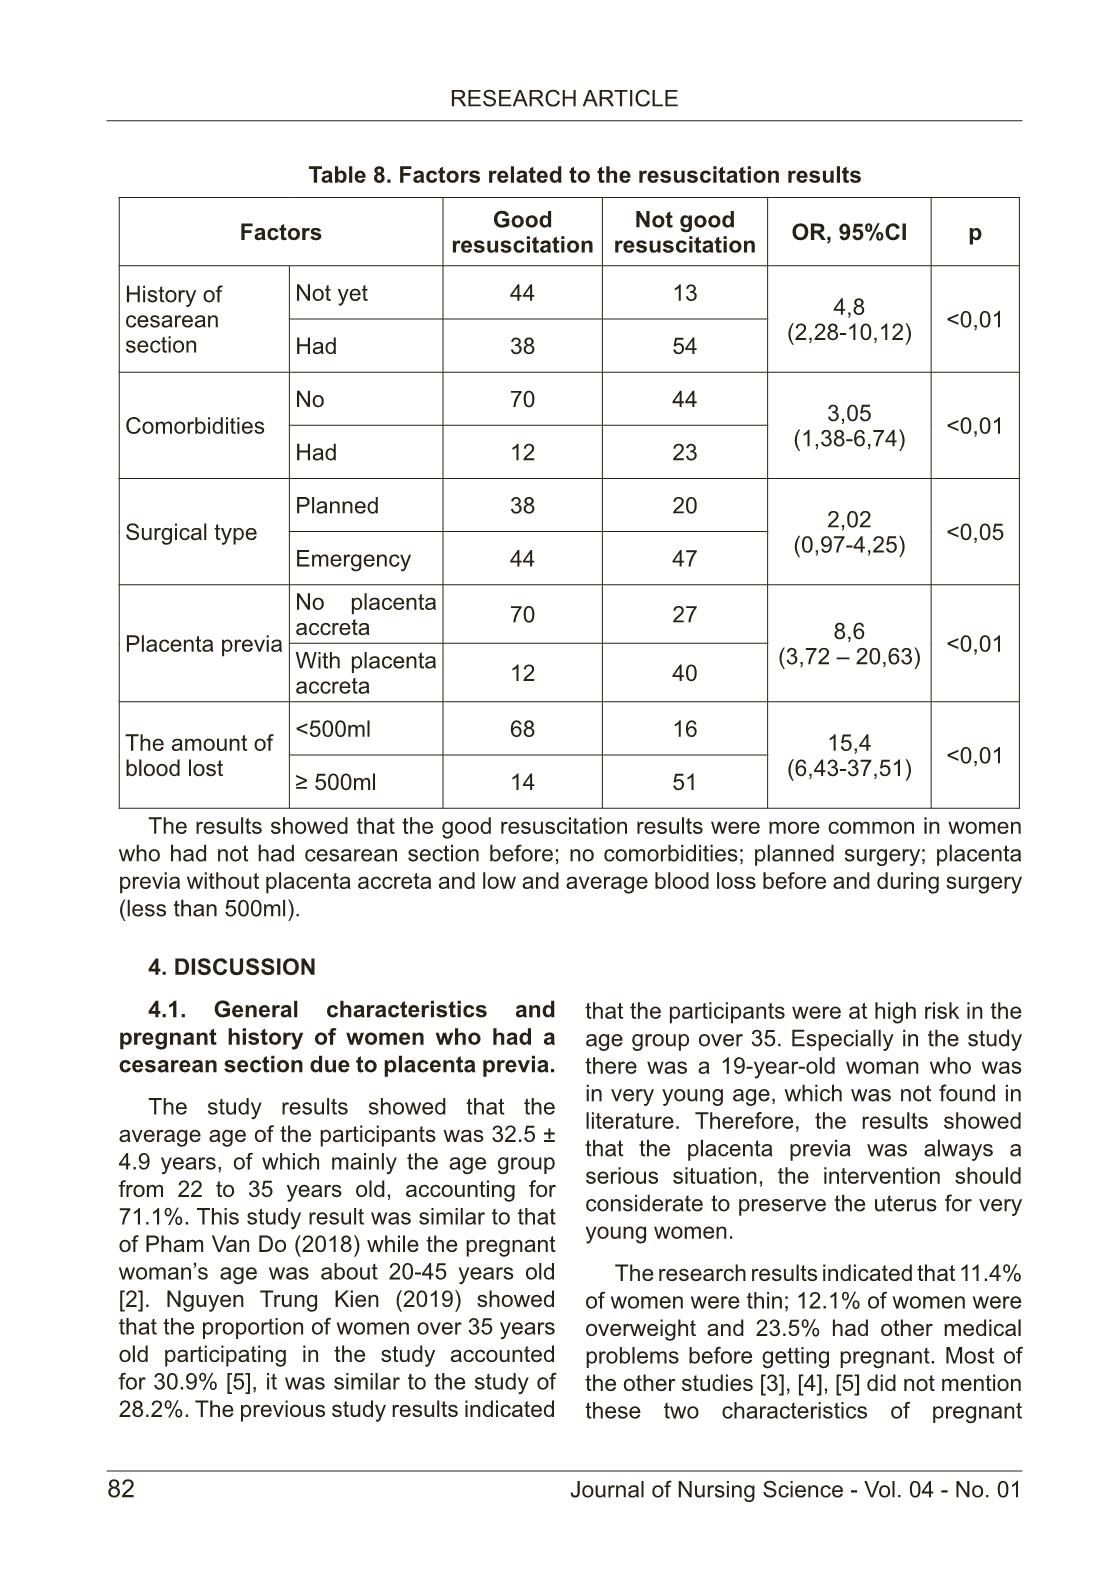 Characteristics of women with cesarean section due to placenta previa at national hospital of obstetric and gynecology in 2020 trang 7